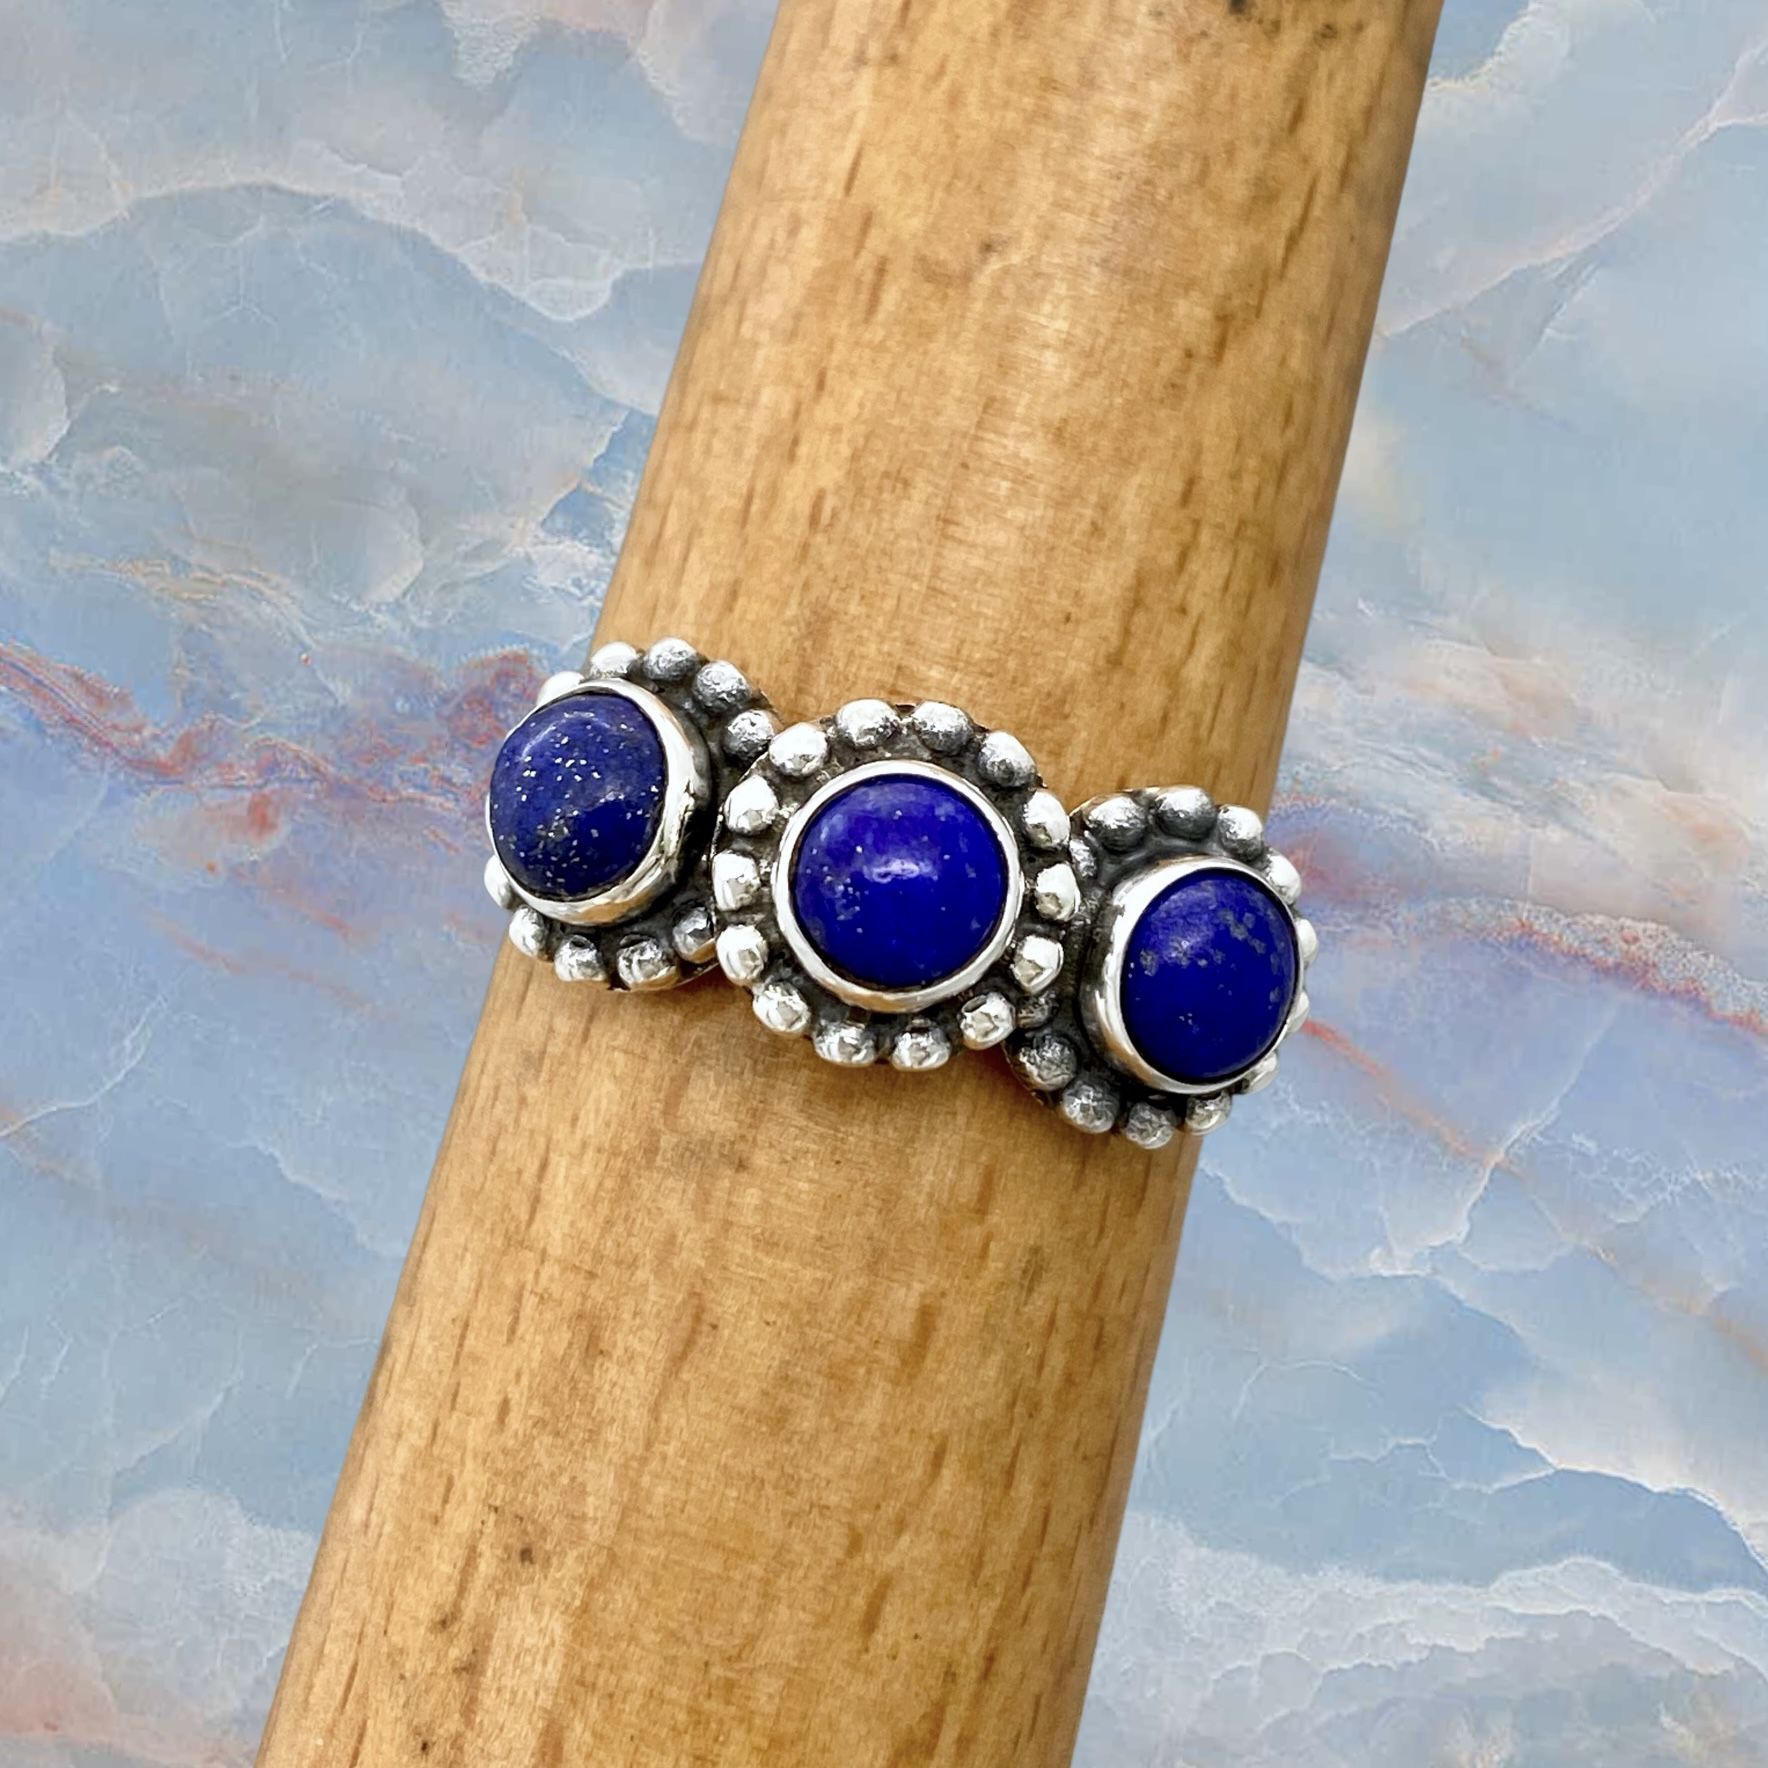 Handcrafted Genuine Lapis Lazuli & Solid Sterling Silver Ring - Sz 9